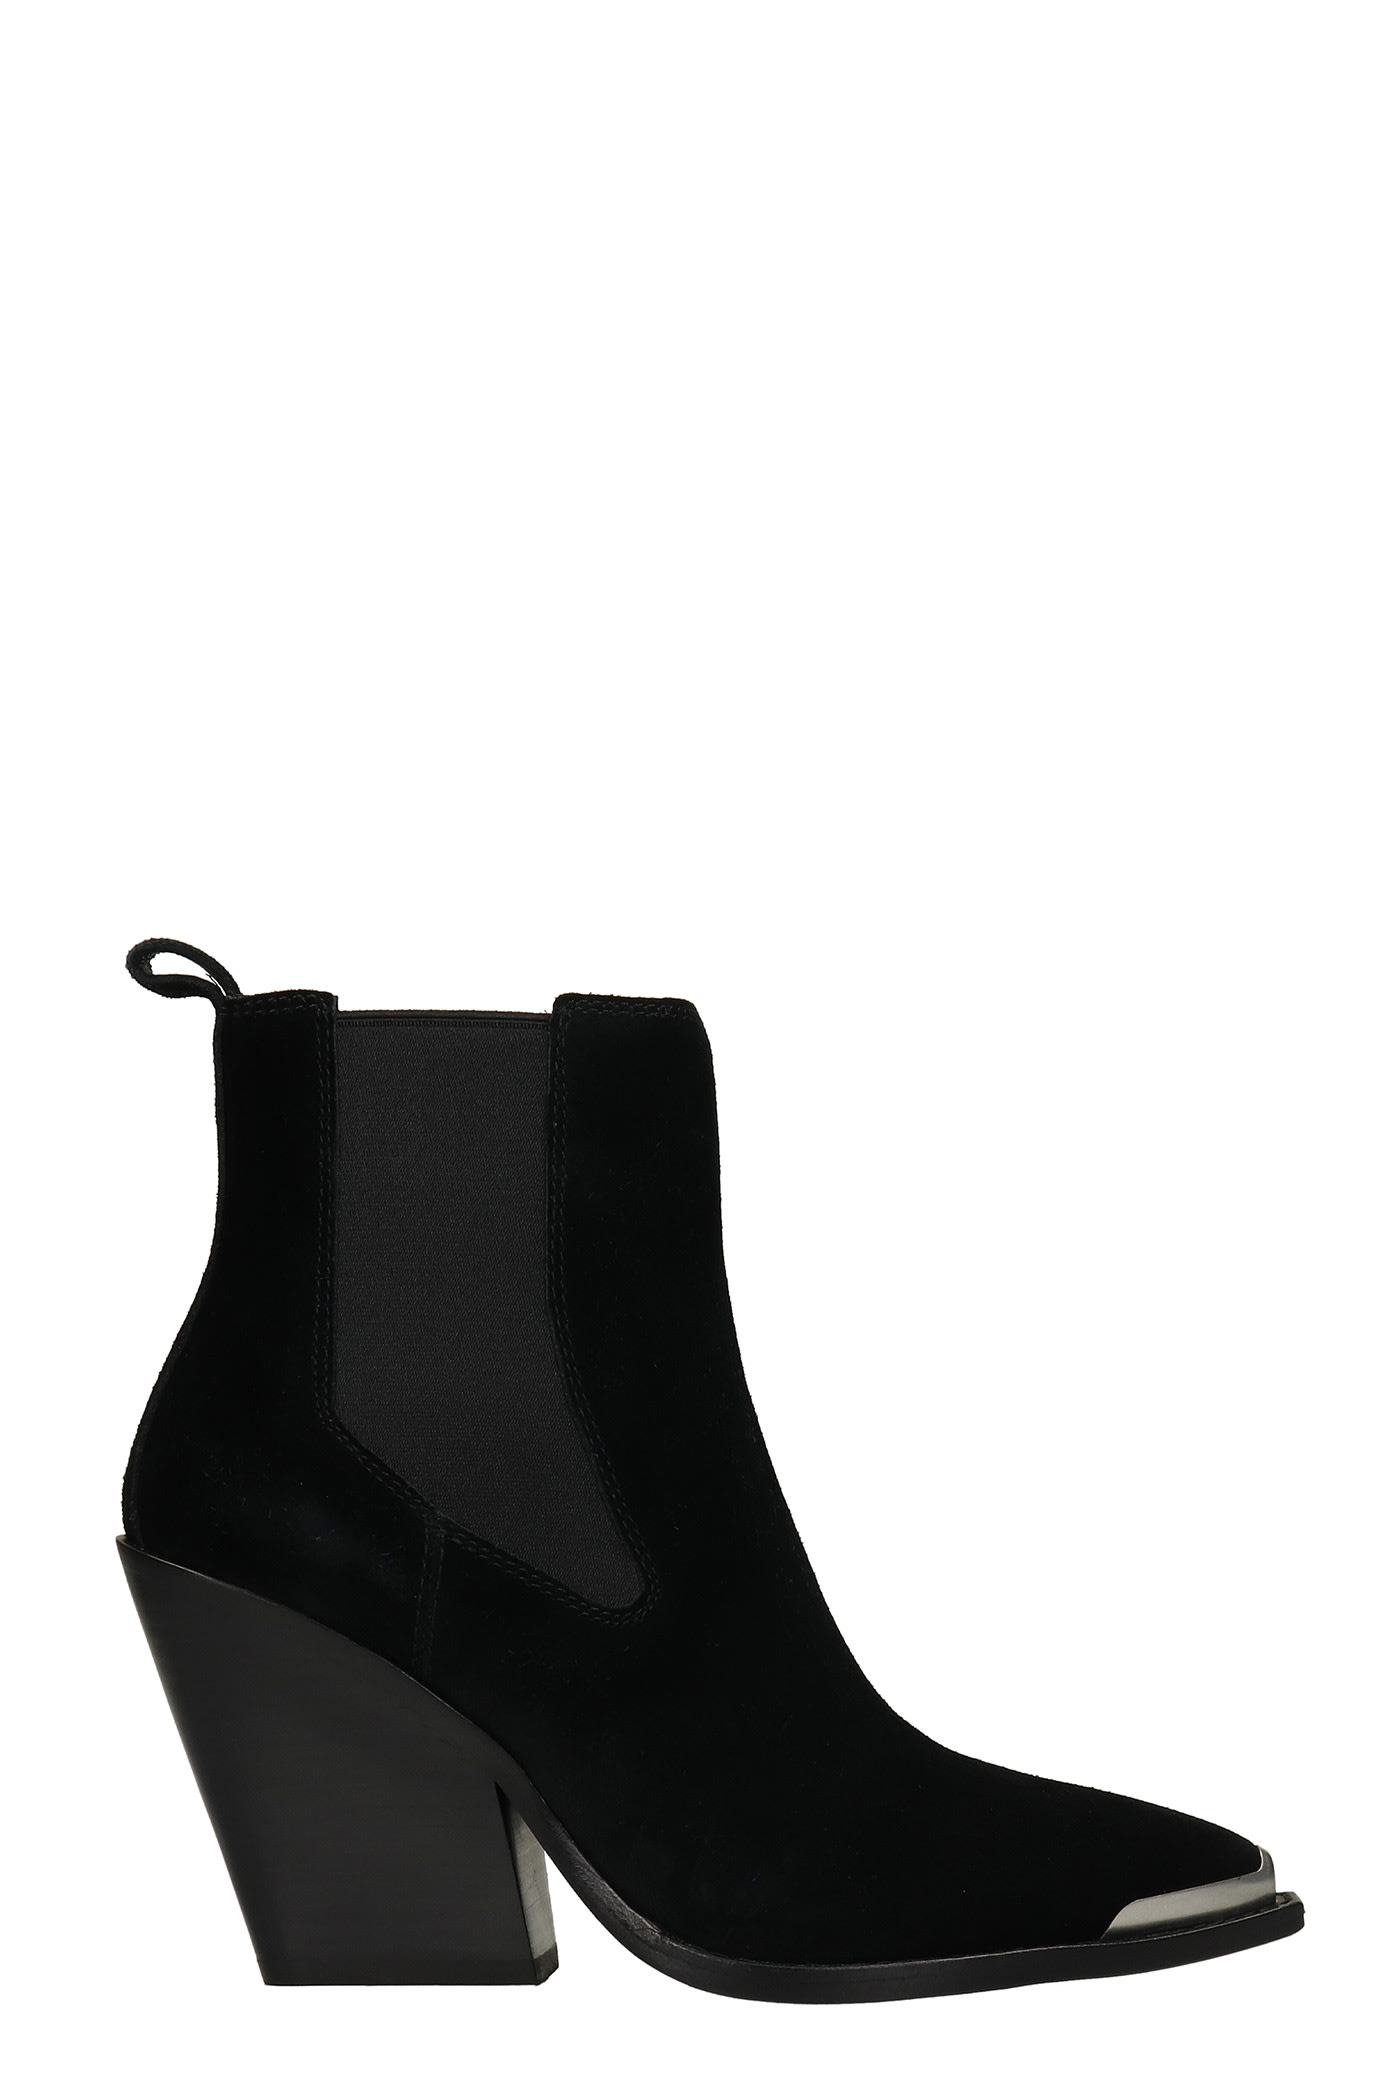 Ash Bowie Texan Ankle Boots In Black Suede